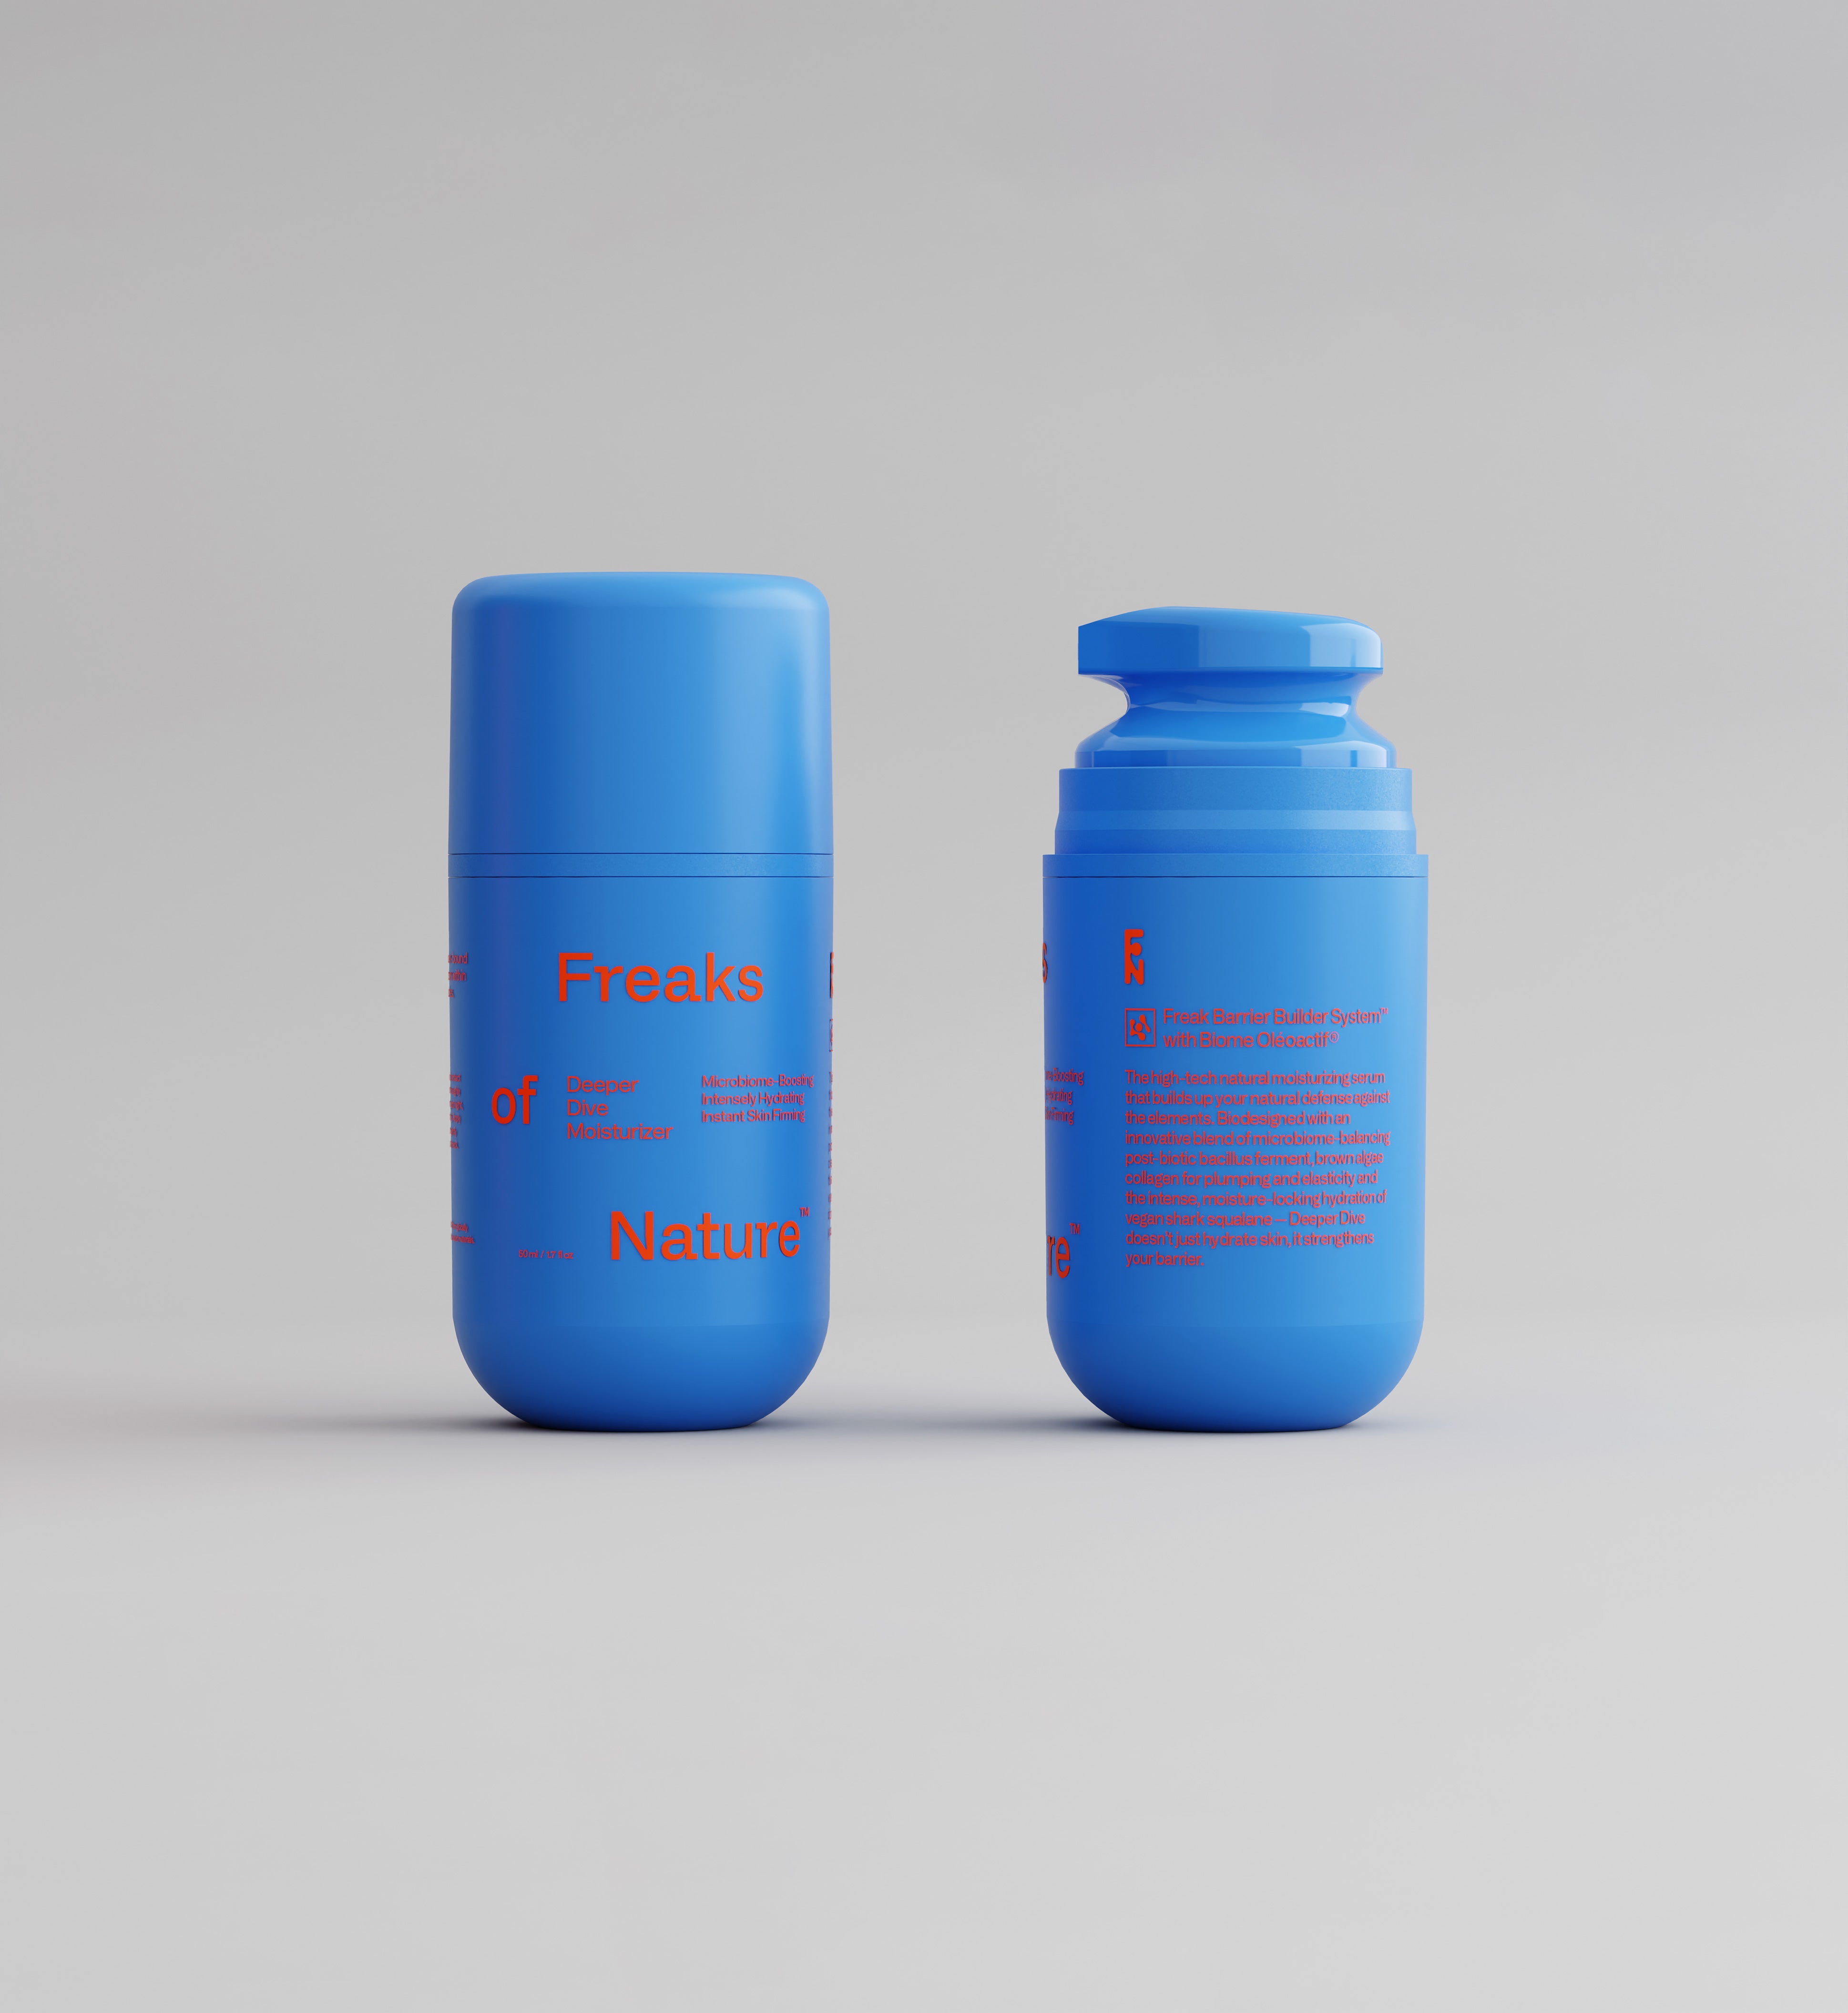 Two blue cylindrical containers with red text on them, positioned against a neutral background. One container has its cap on, while the other has the cap off, revealing a dispensing mechanism. The text reads "Freaks of Nature Skincare" and product details about its Deeper Dive Moisturizer microbiome-balancing moisturizing serum.